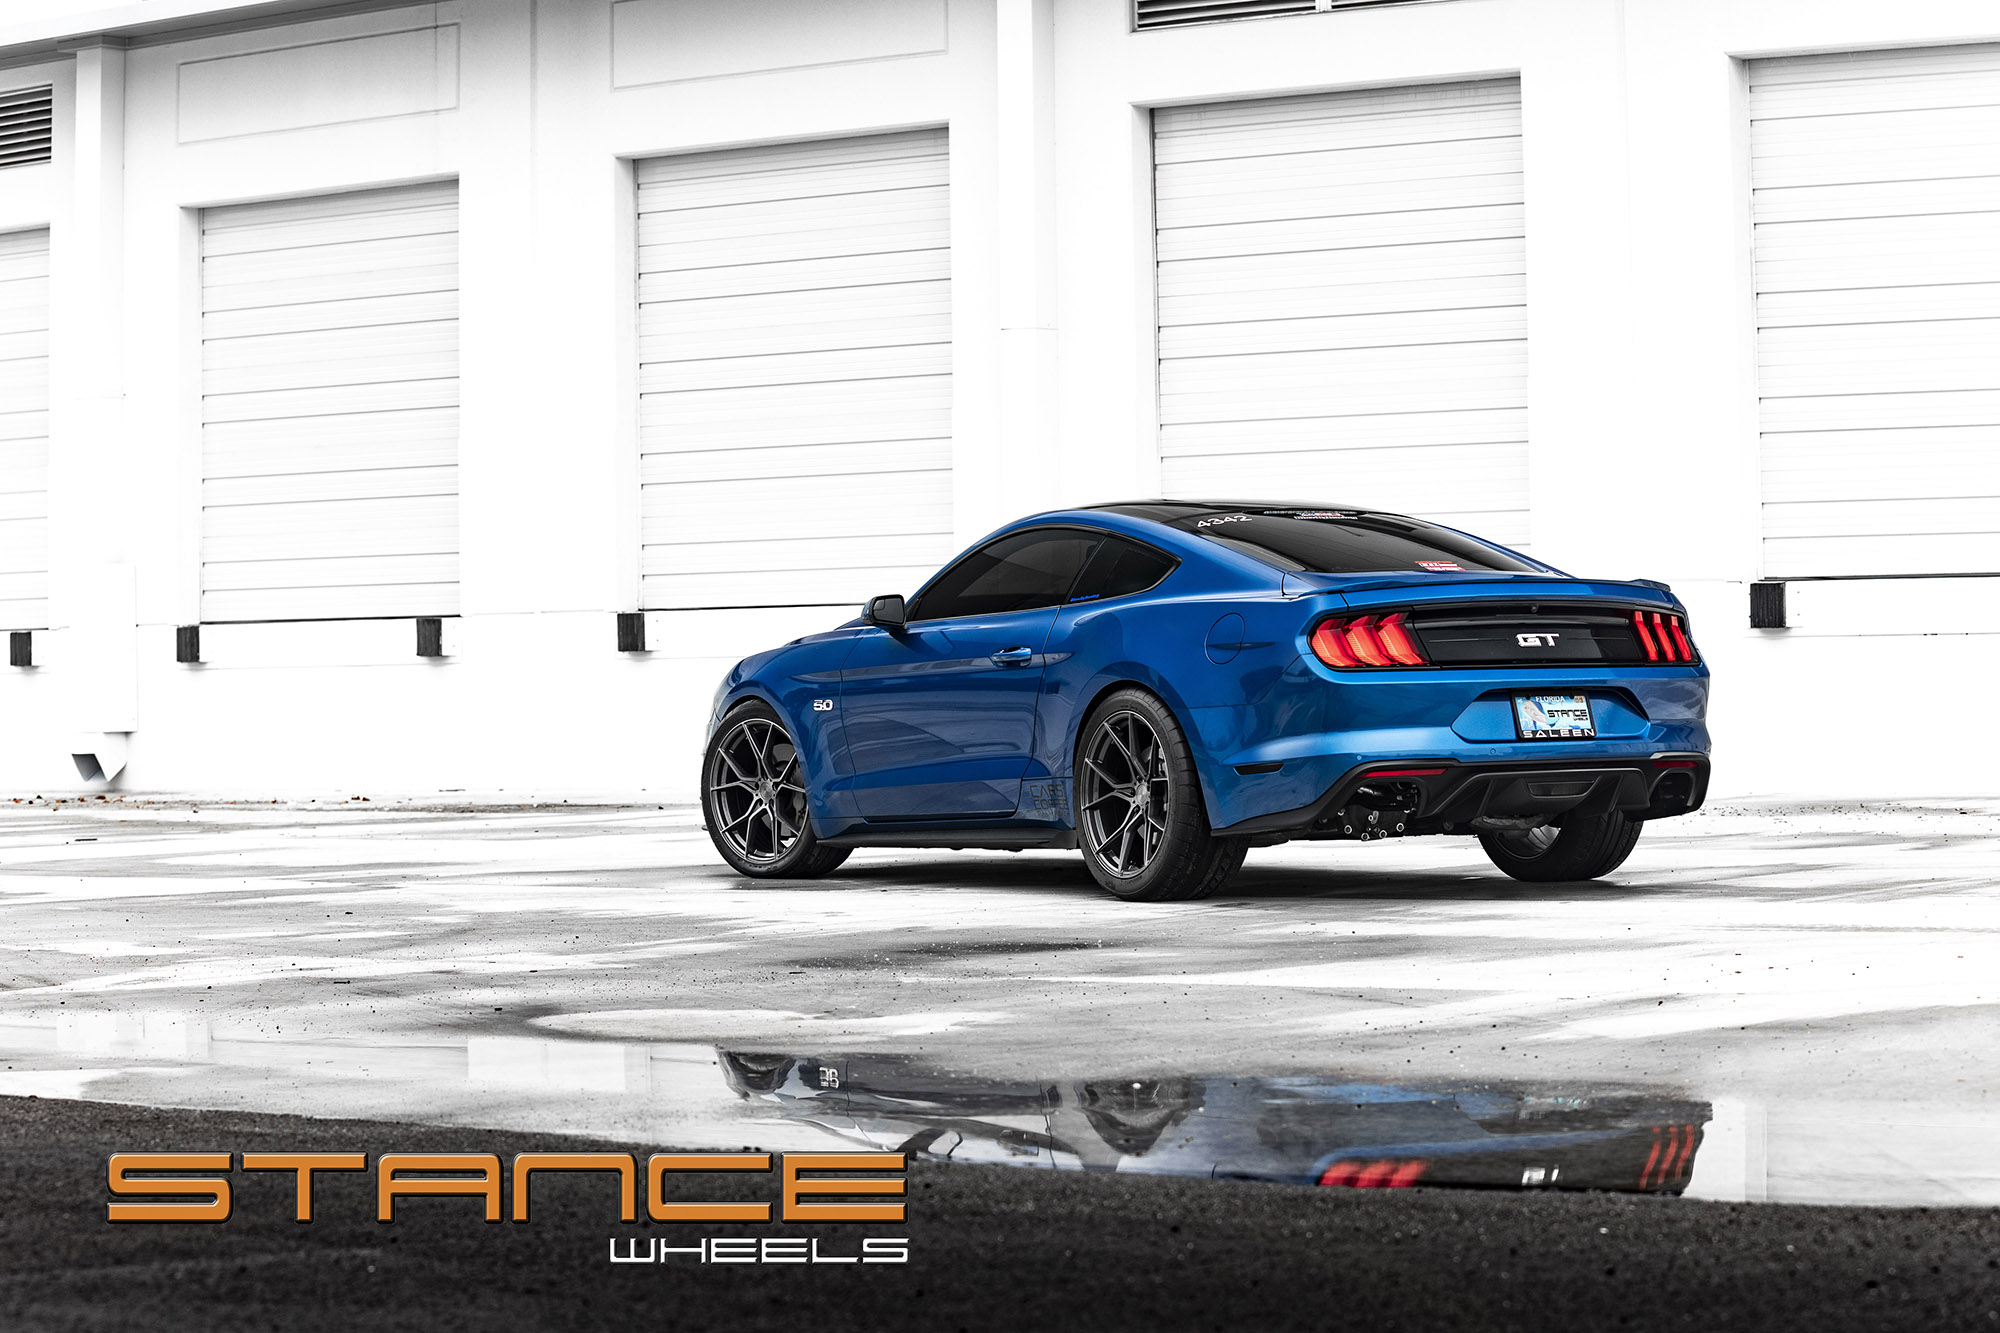 S650 Mustang Authorize Dealer Stance: Rotary Forged SF Series Wheels For Mustang S650 stance forum 5